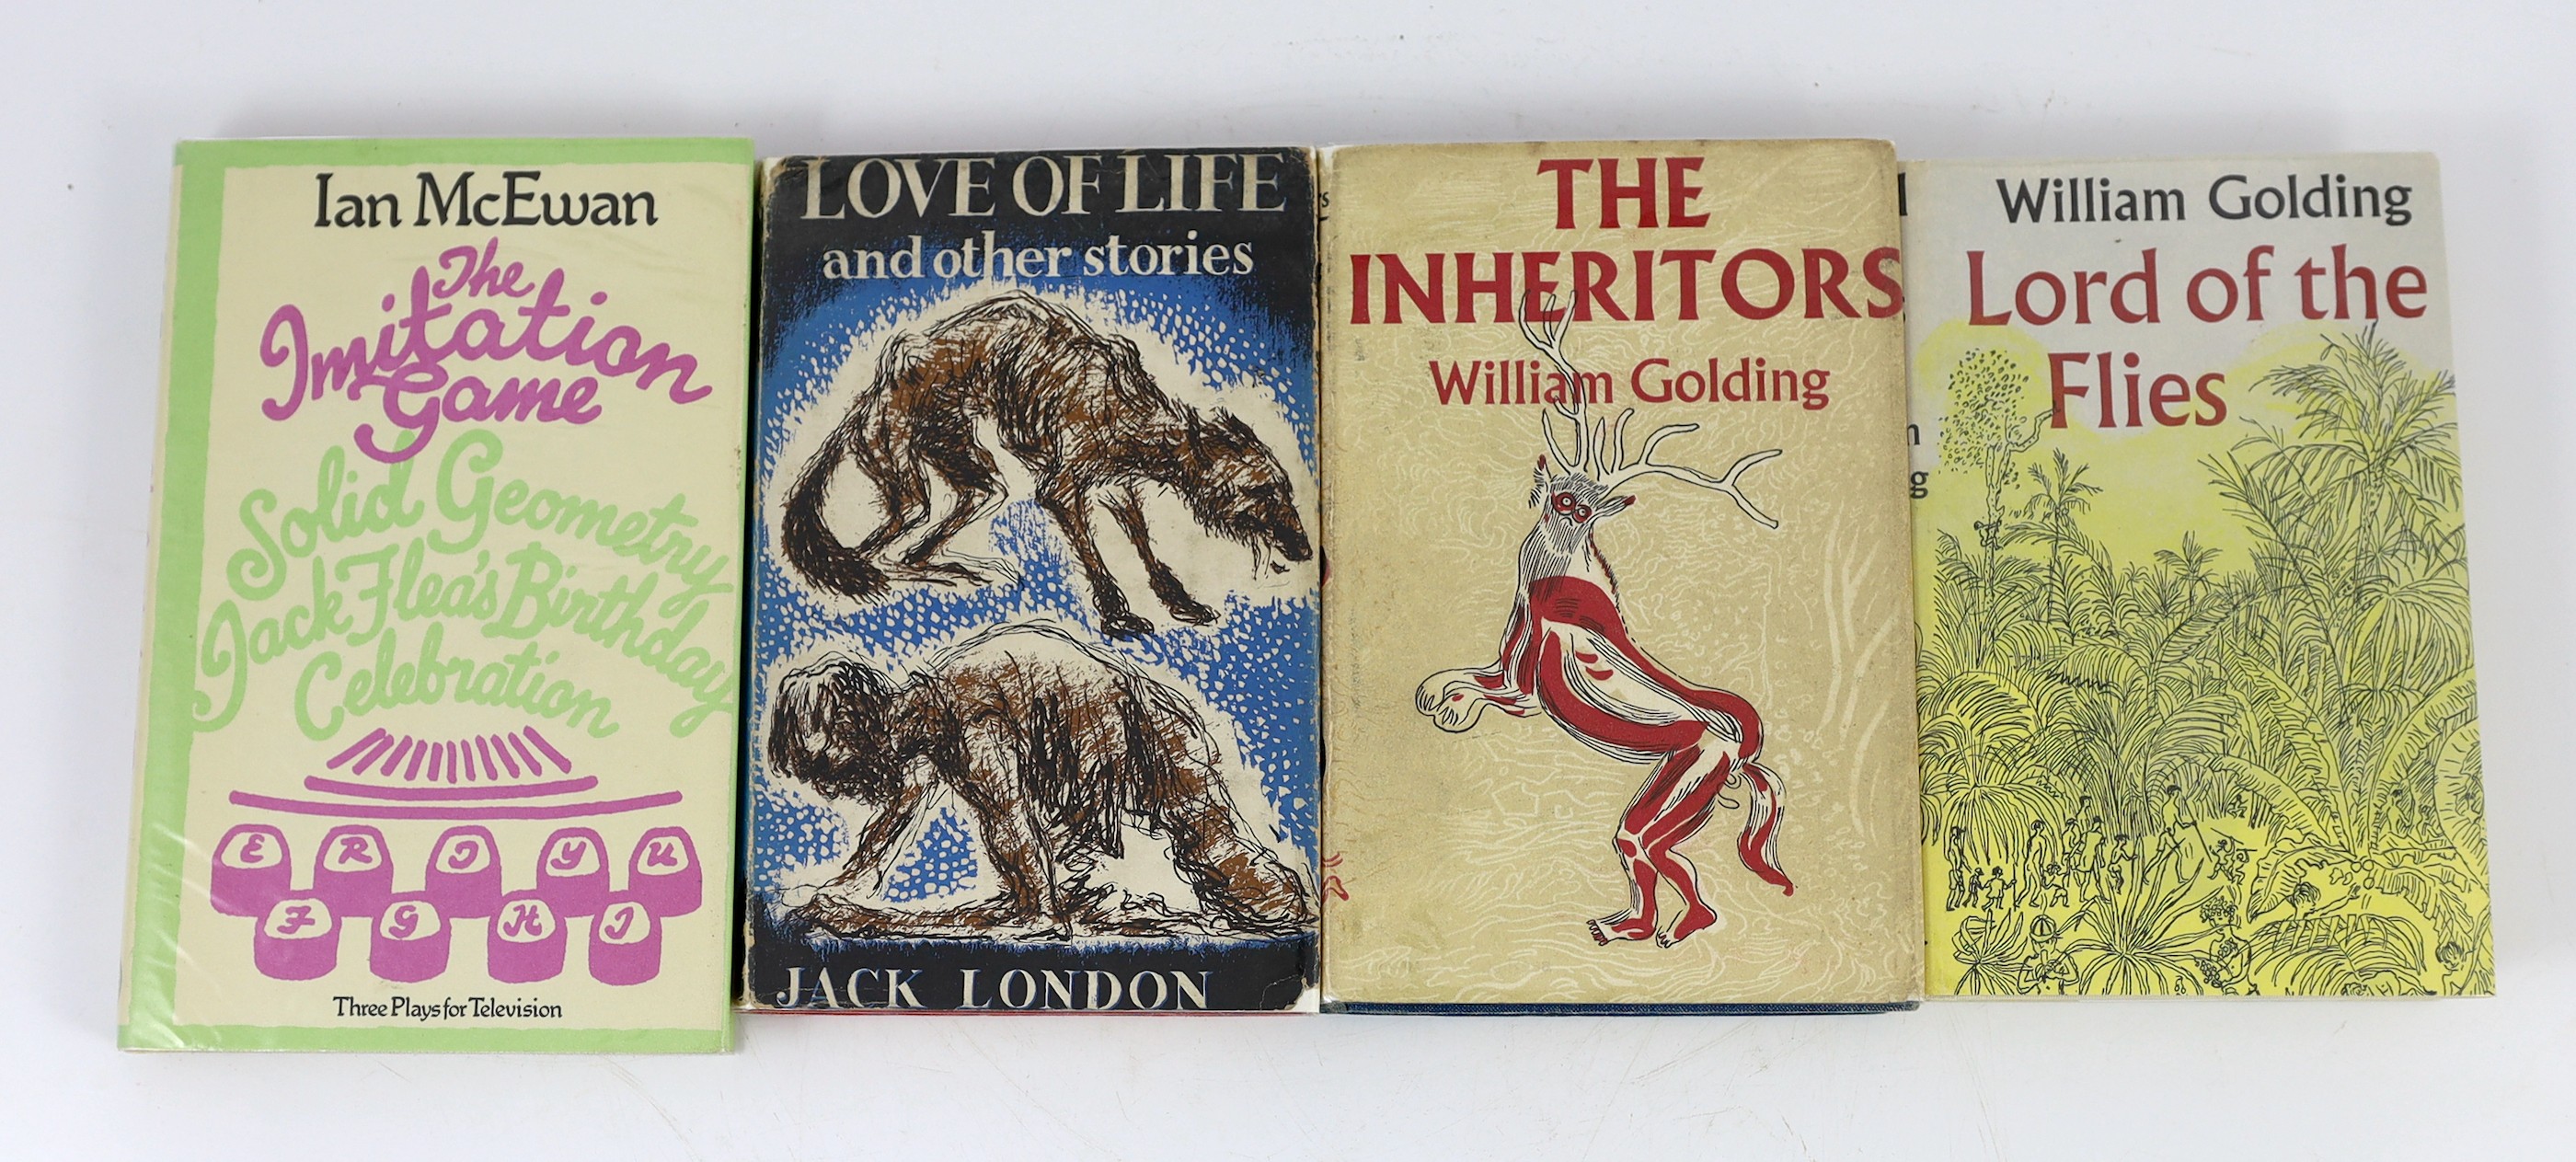 Golding, William - The Inheritors, 1st edition, with unclipped d/j, W.H. Smith library club ticket to paste down, Faber & Faber, London, 1955 and Lord of the Flies, 1st edition, 12th impression, with library stamp to cop